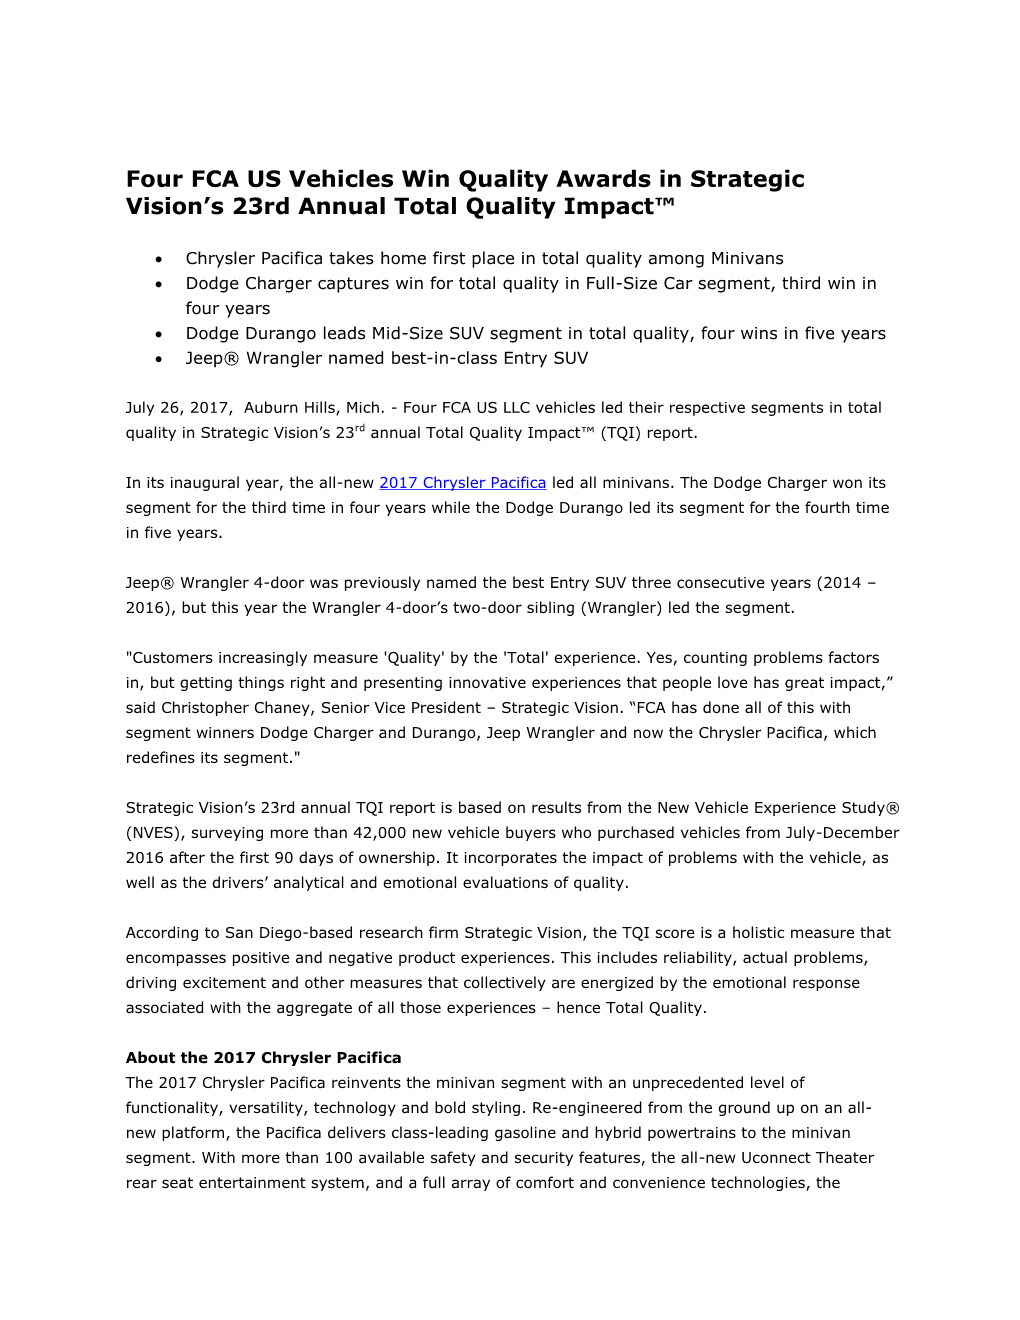 Four FCA US Vehicles Win Quality Awards in Strategic Vision's 23Rd